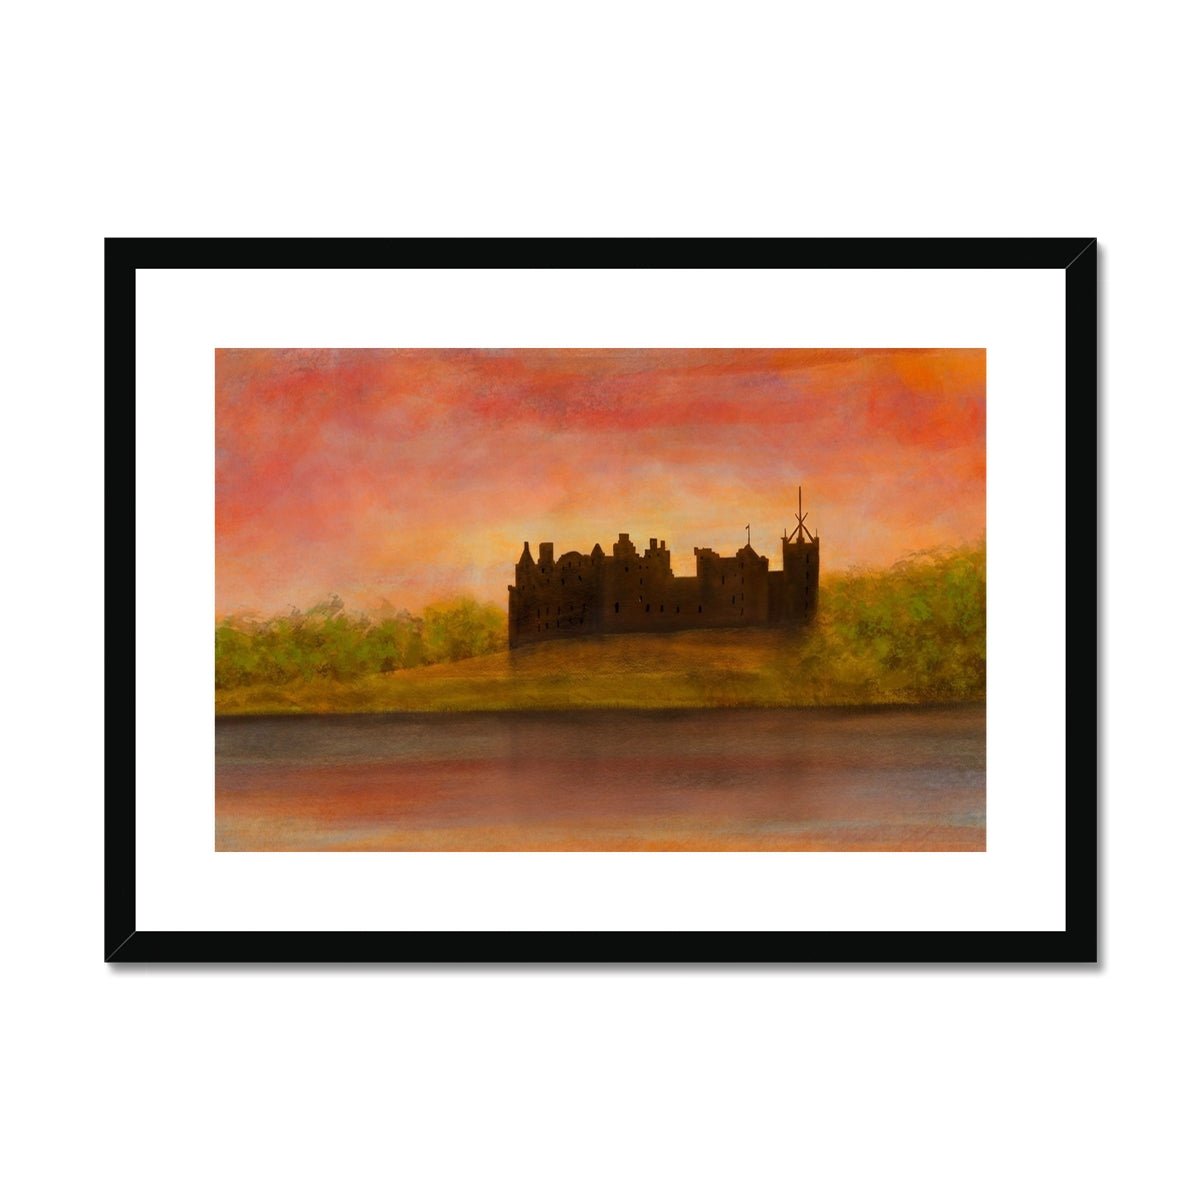 Linlithgow Palace Dusk Painting | Framed & Mounted Prints From Scotland-Framed & Mounted Prints-Historic & Iconic Scotland Art Gallery-A2 Landscape-Black Frame-Paintings, Prints, Homeware, Art Gifts From Scotland By Scottish Artist Kevin Hunter